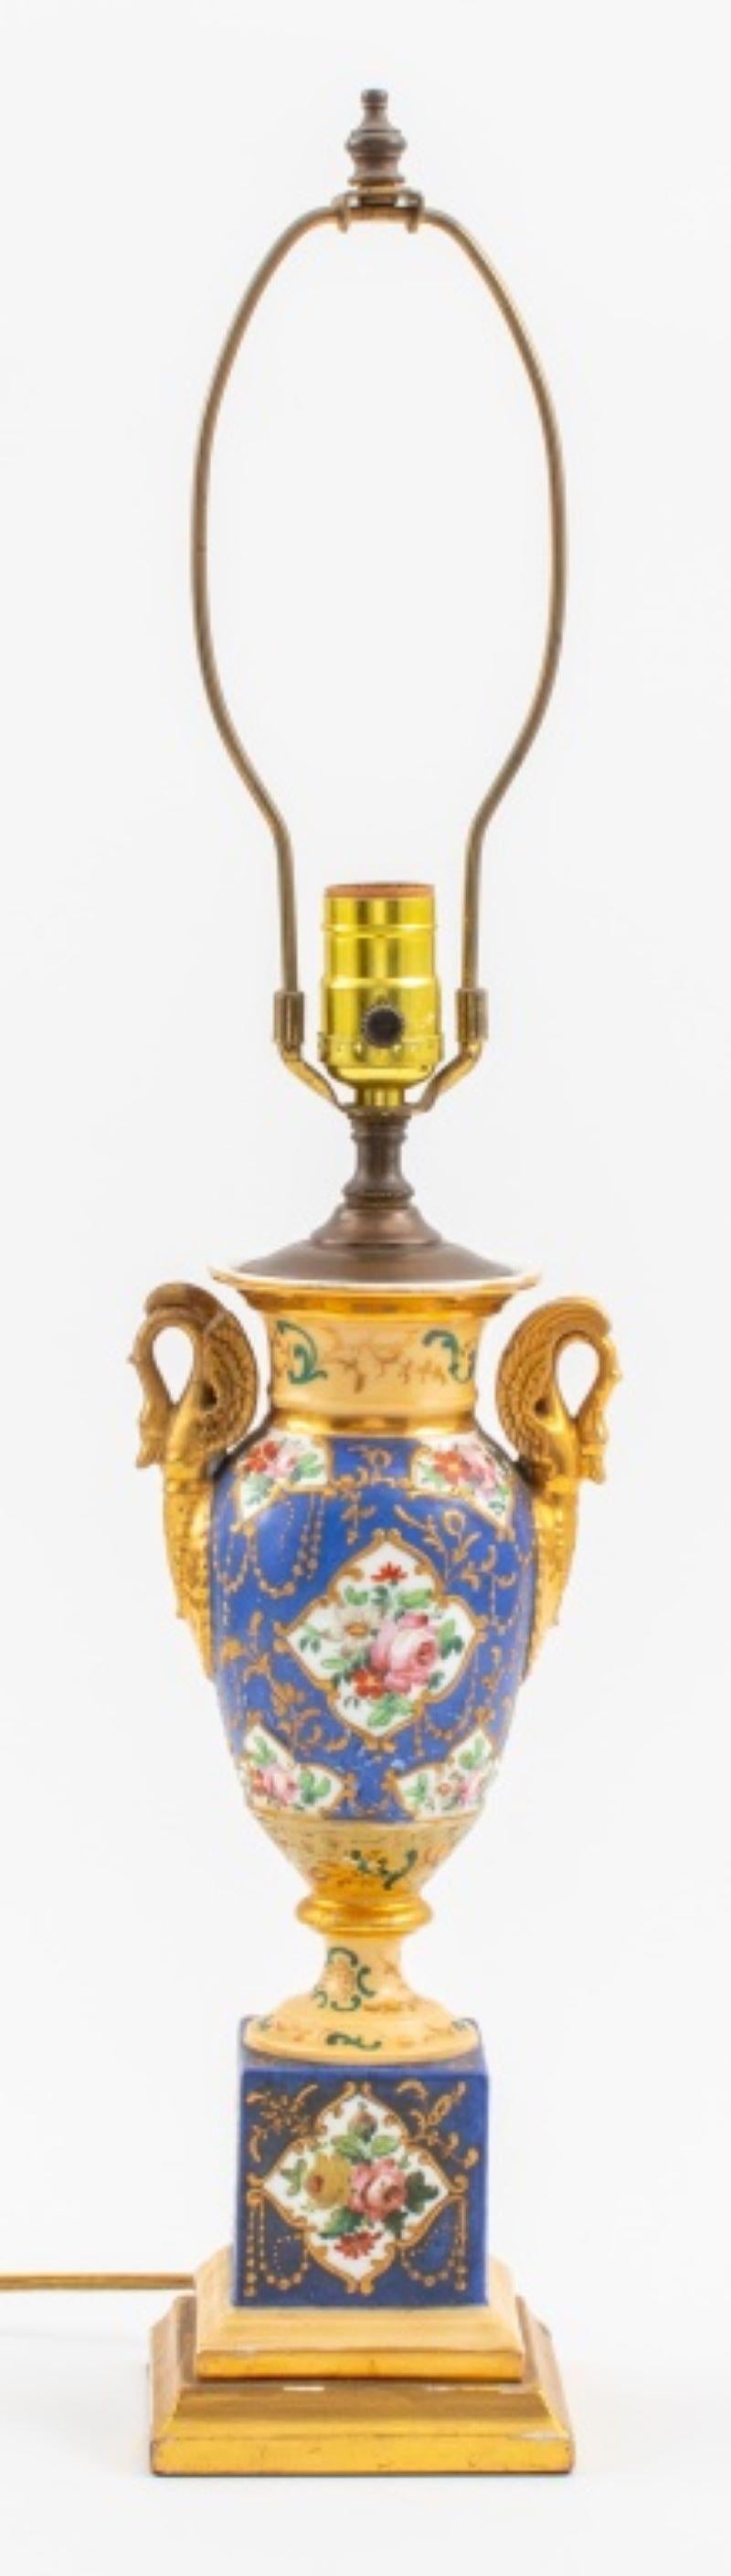 Sevres Style Porcelain Urns Mounted as Lamps, Pair In Good Condition For Sale In New York, NY